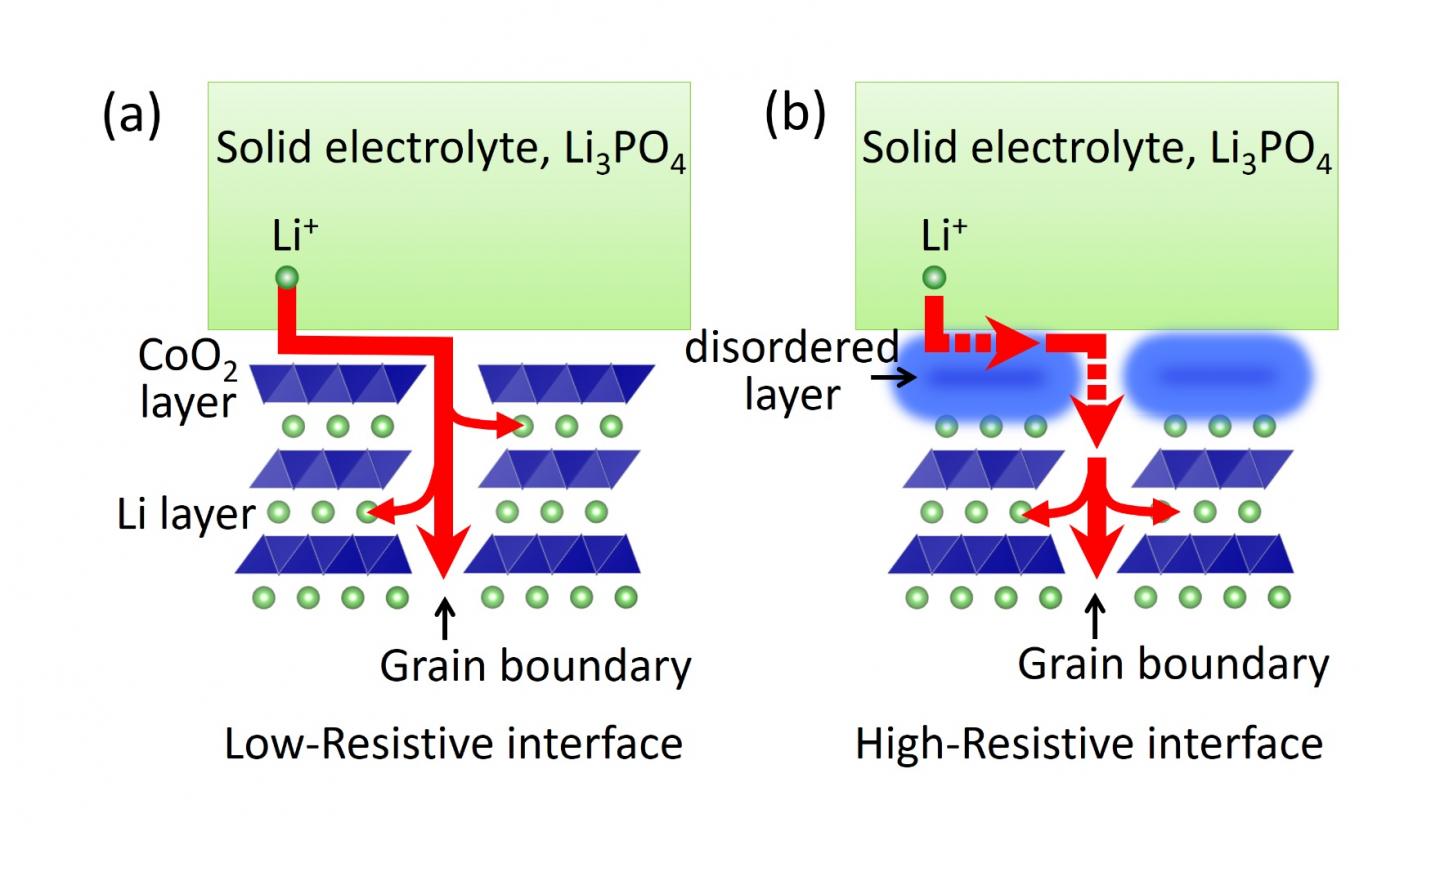 Conduction Path of Li Ions at the Solid-Electrolyte/Electrode Interface